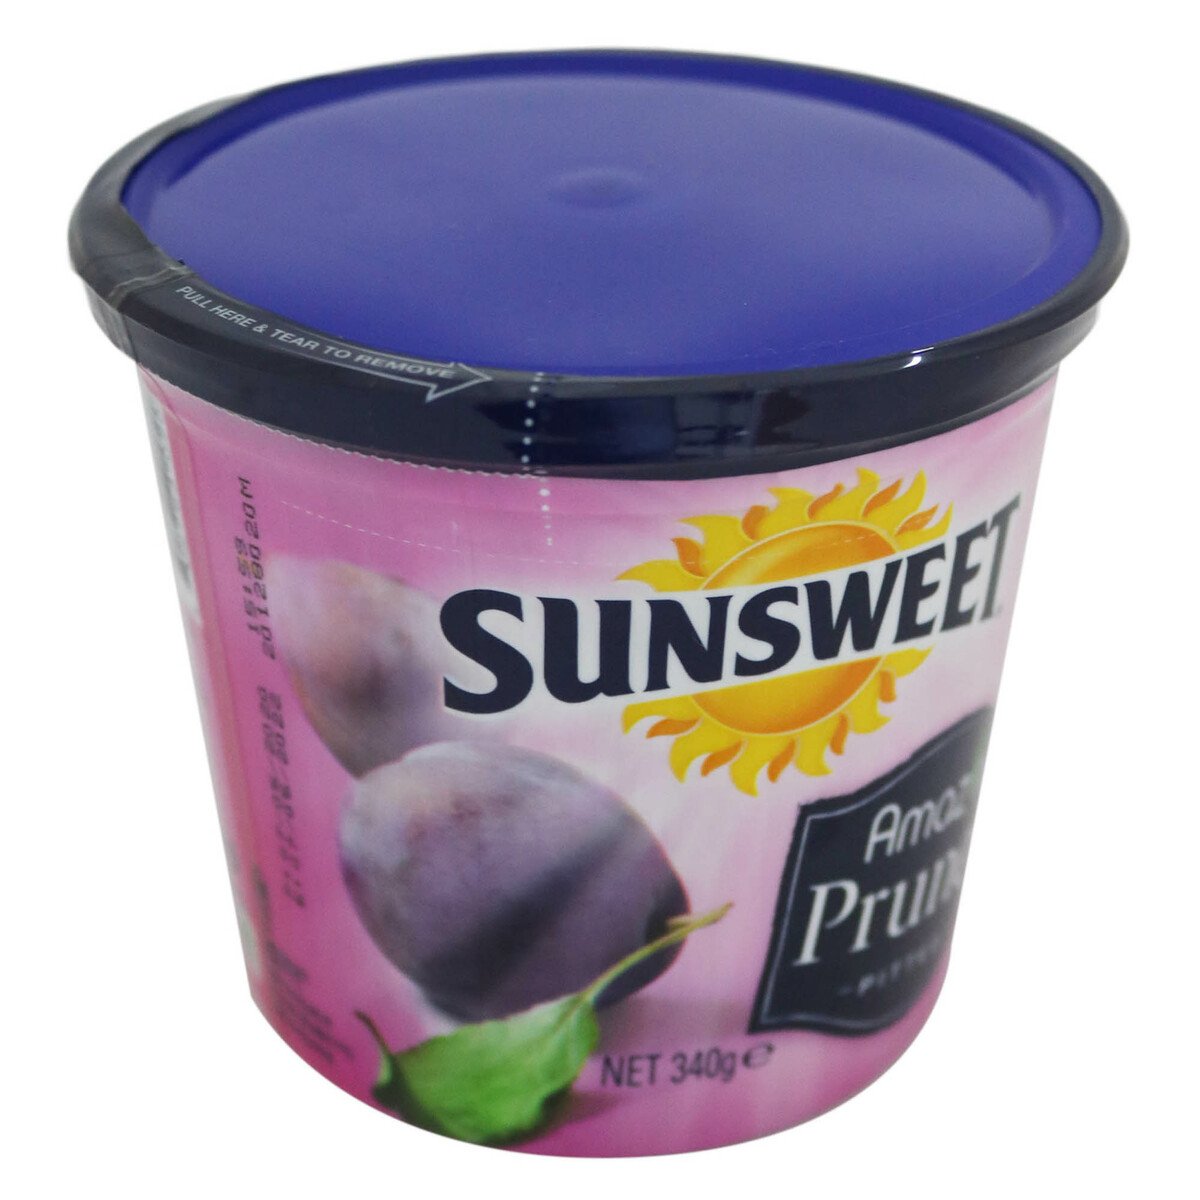 Sunsweet Pitted Prunes 340g